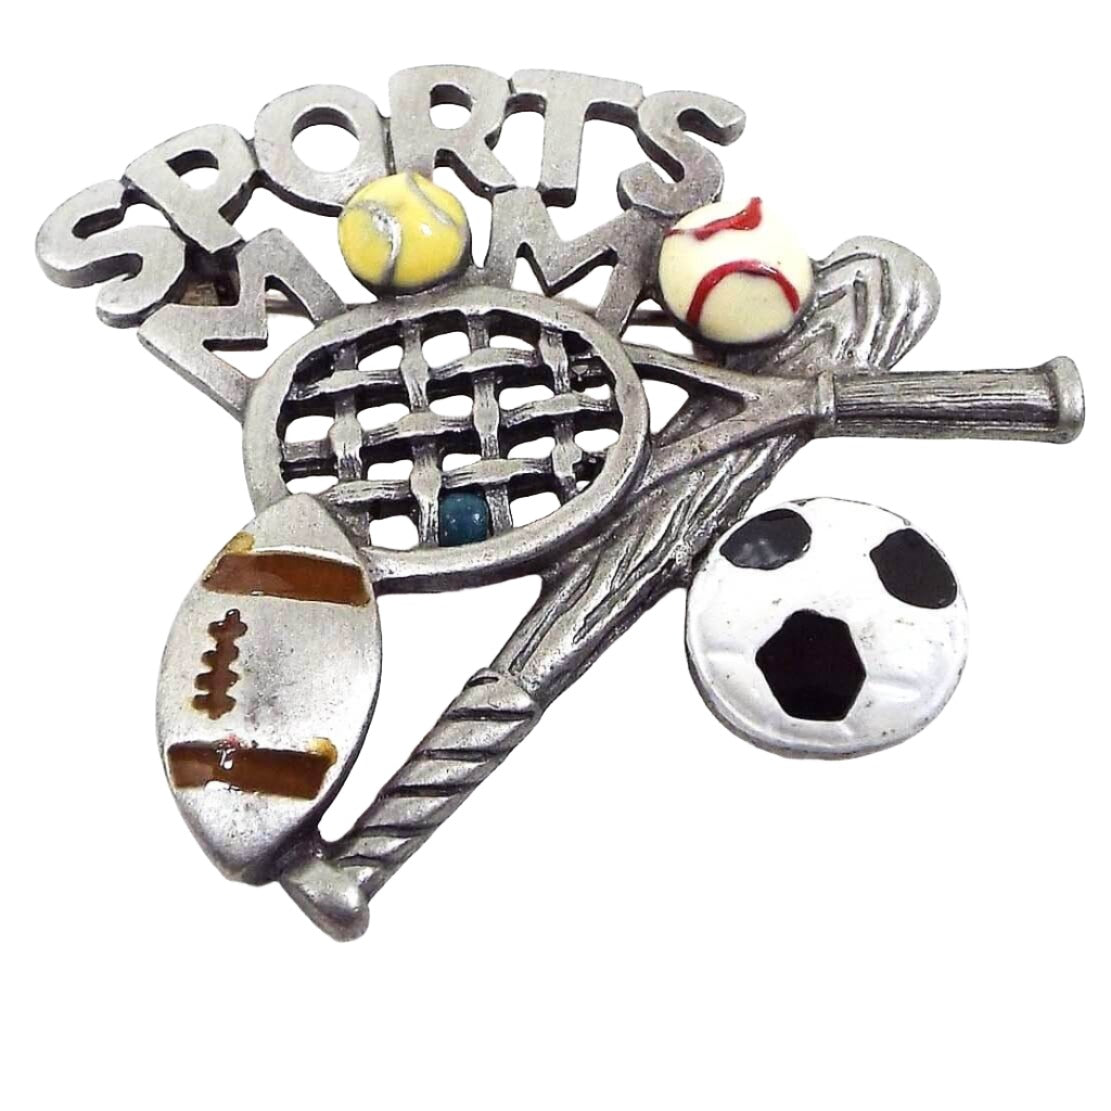 Front view of the retro vintage enameled Sports Mom brooch pin. It is pewter and has the words "Sports Mom" at the top with a tennis ball as the O in the word Mom. Below that are a tennis racket, baseball, football, baseball bat, and soccer ball. All of the balls on the brooch have enameled areas in colors correlating to the type of ball they are. 